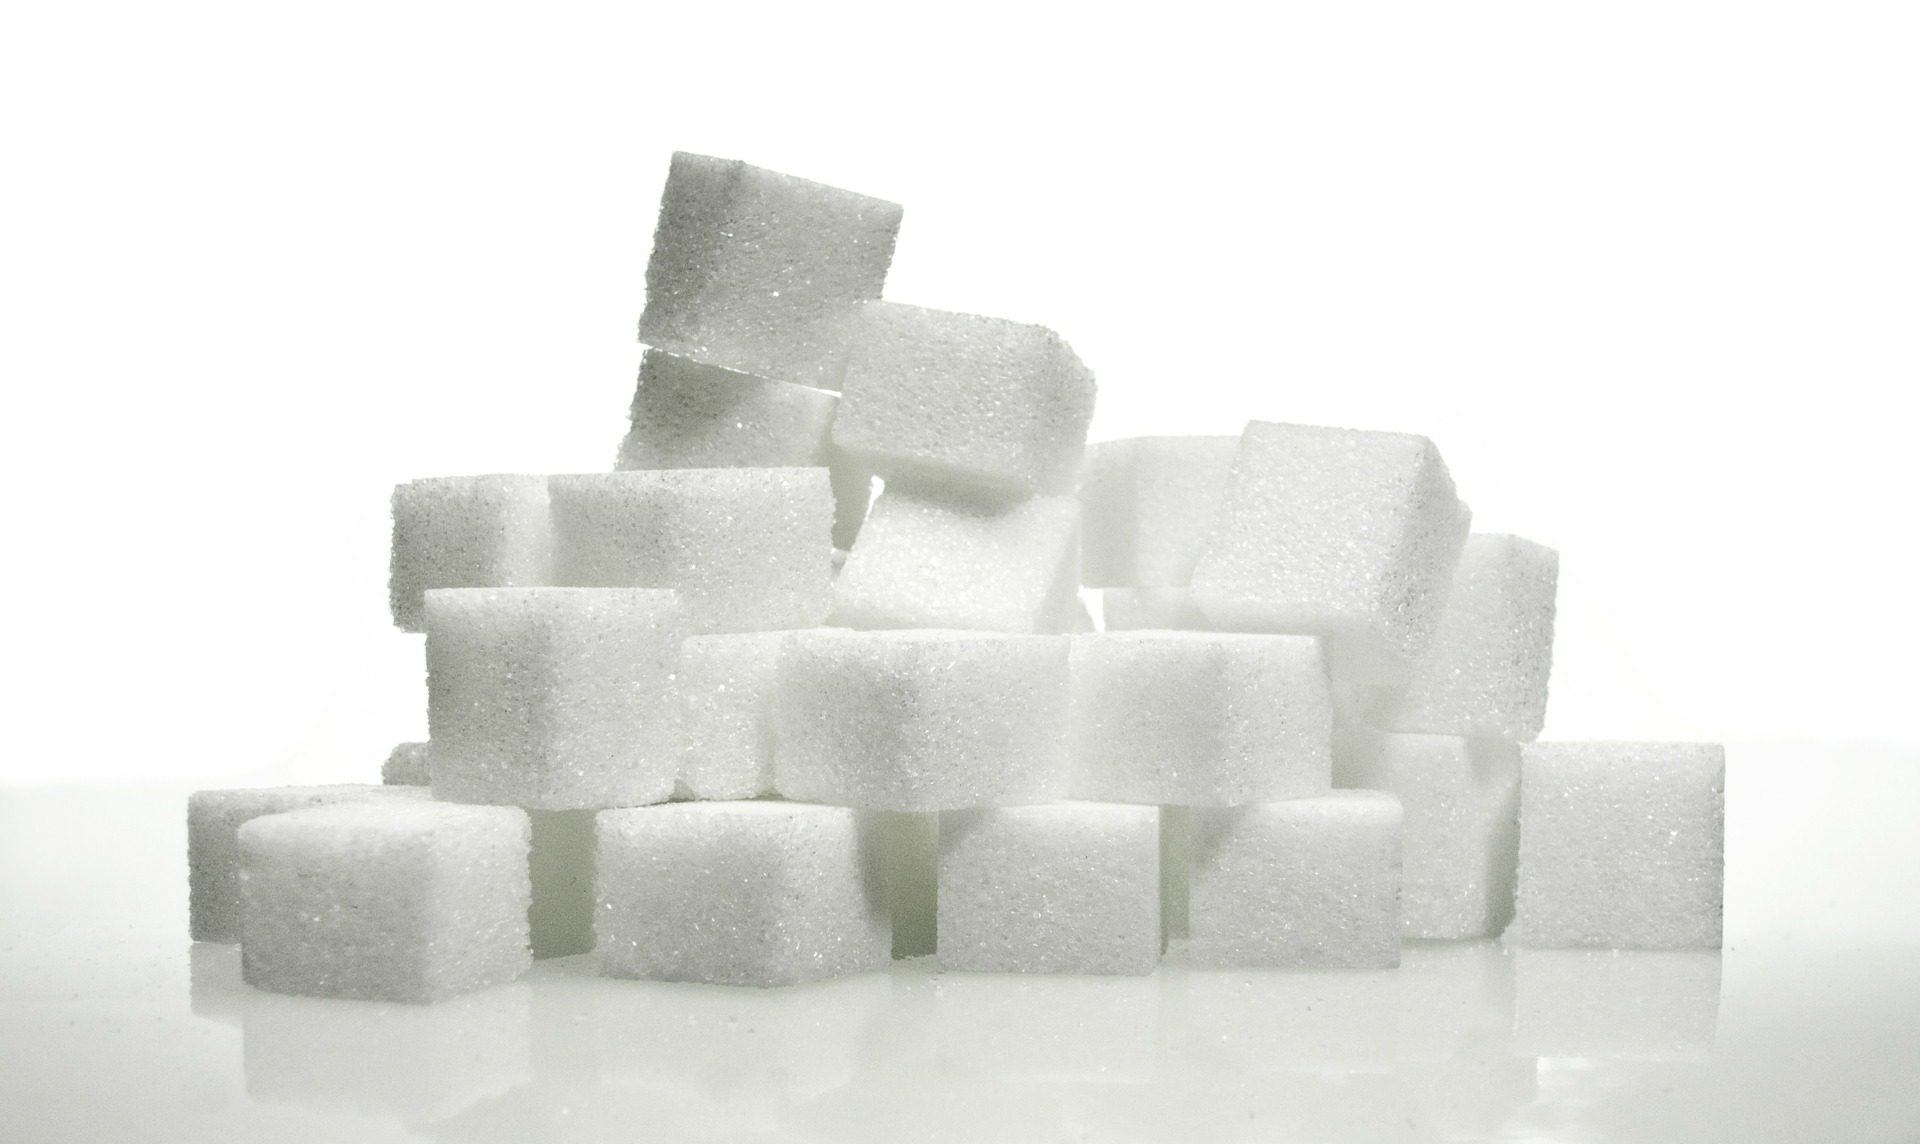 Would you give your child 10kg of sugar?